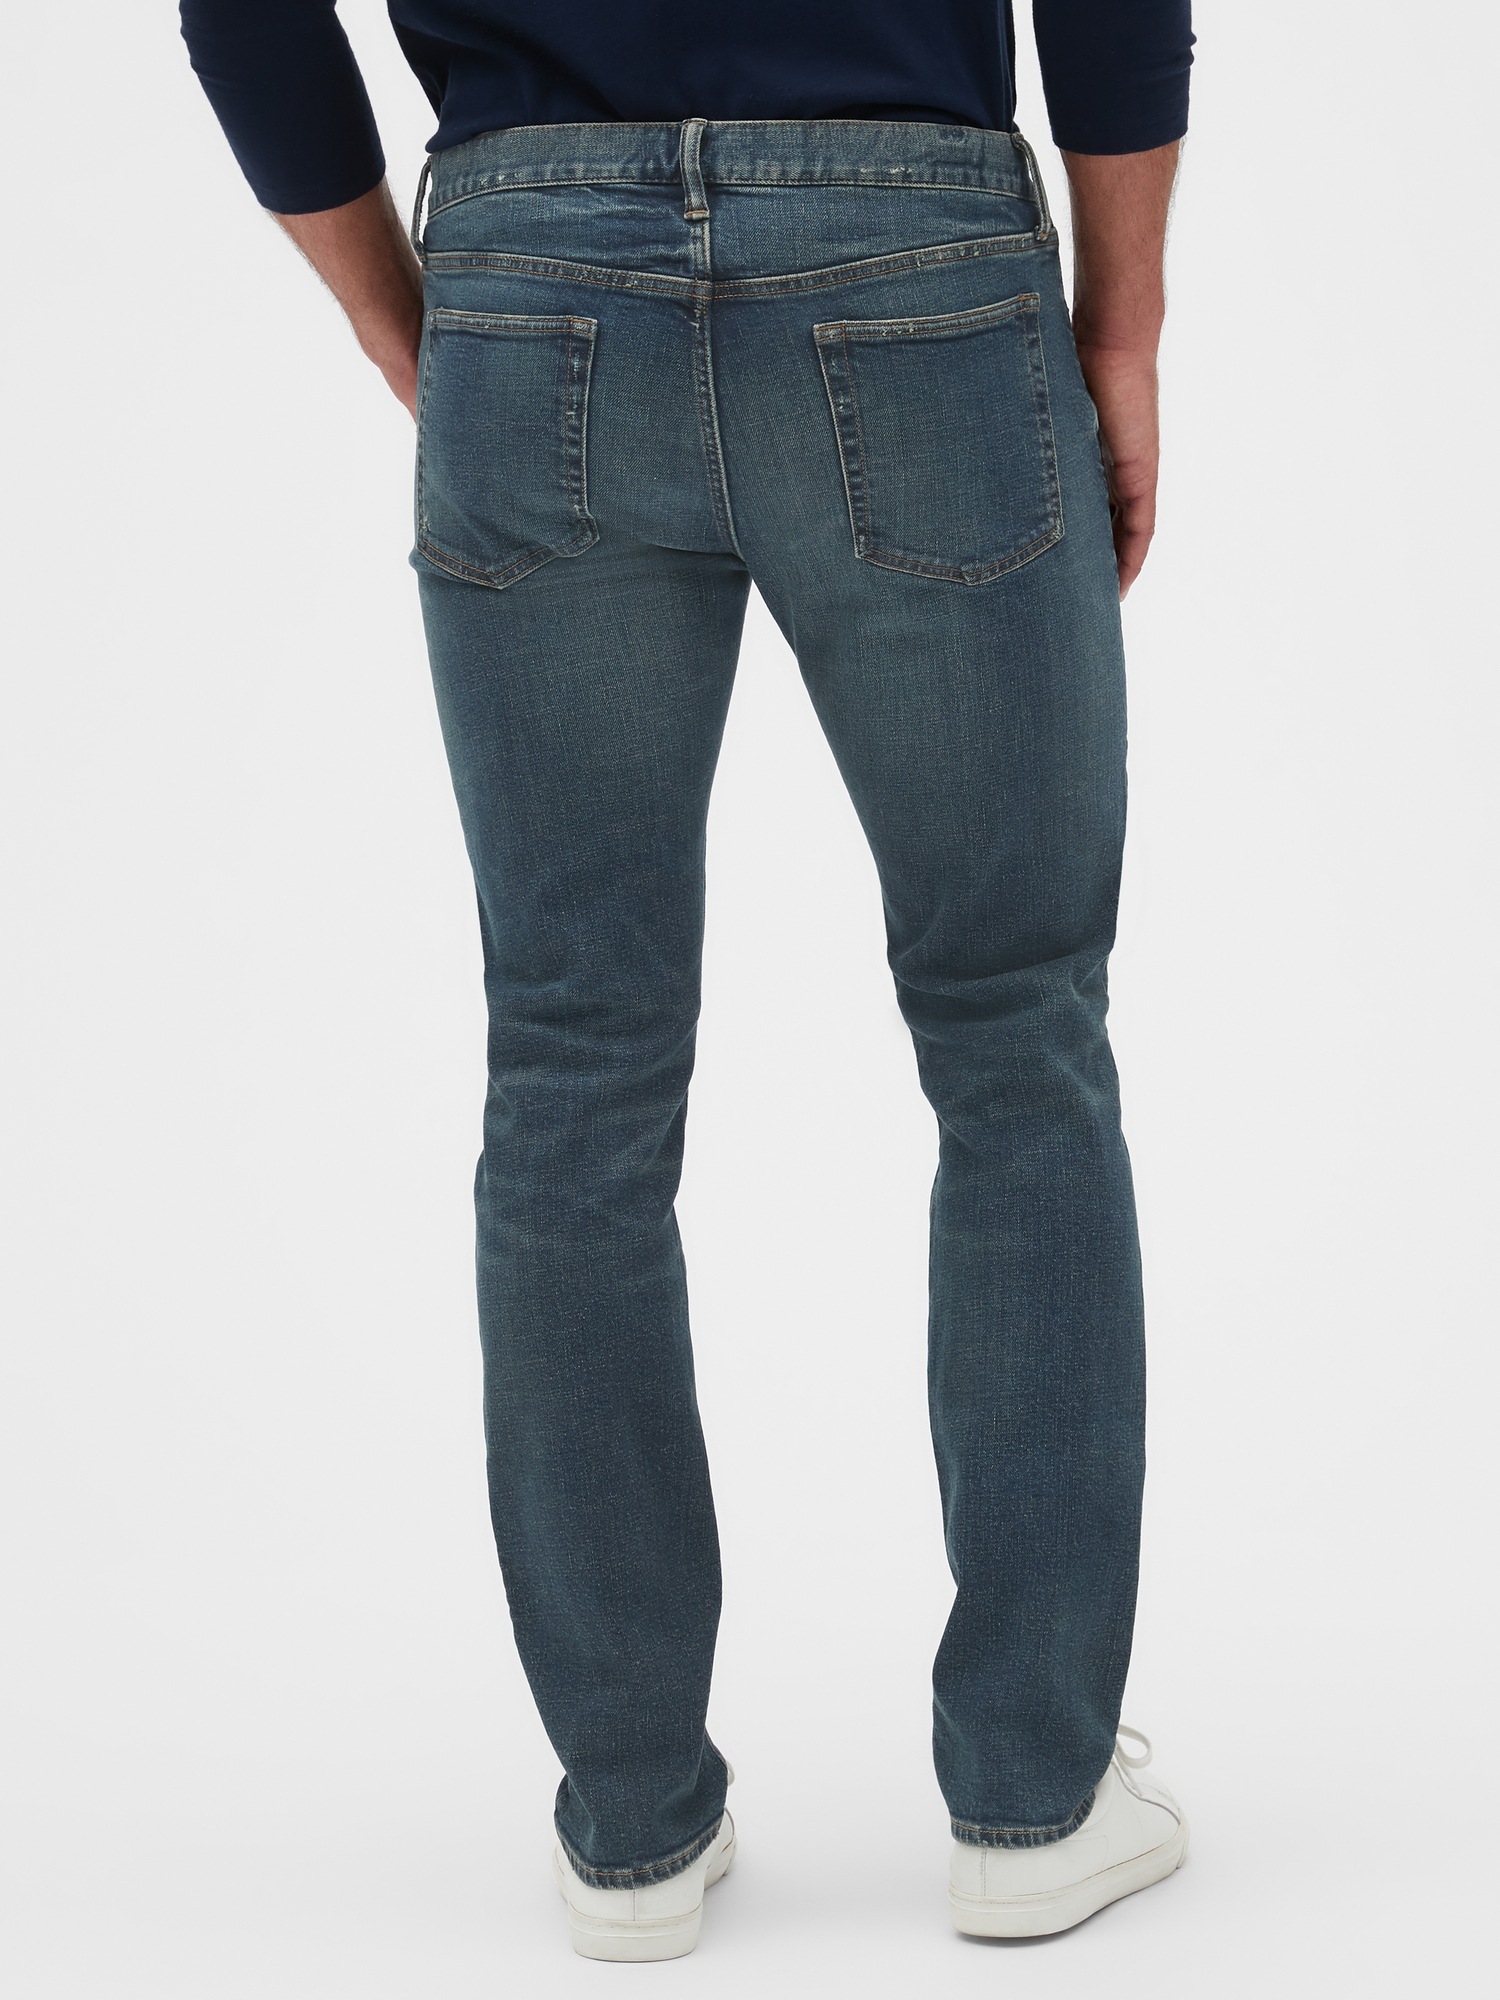 Slim Fit Distressed Jeans with GapFlex | Gap Factory